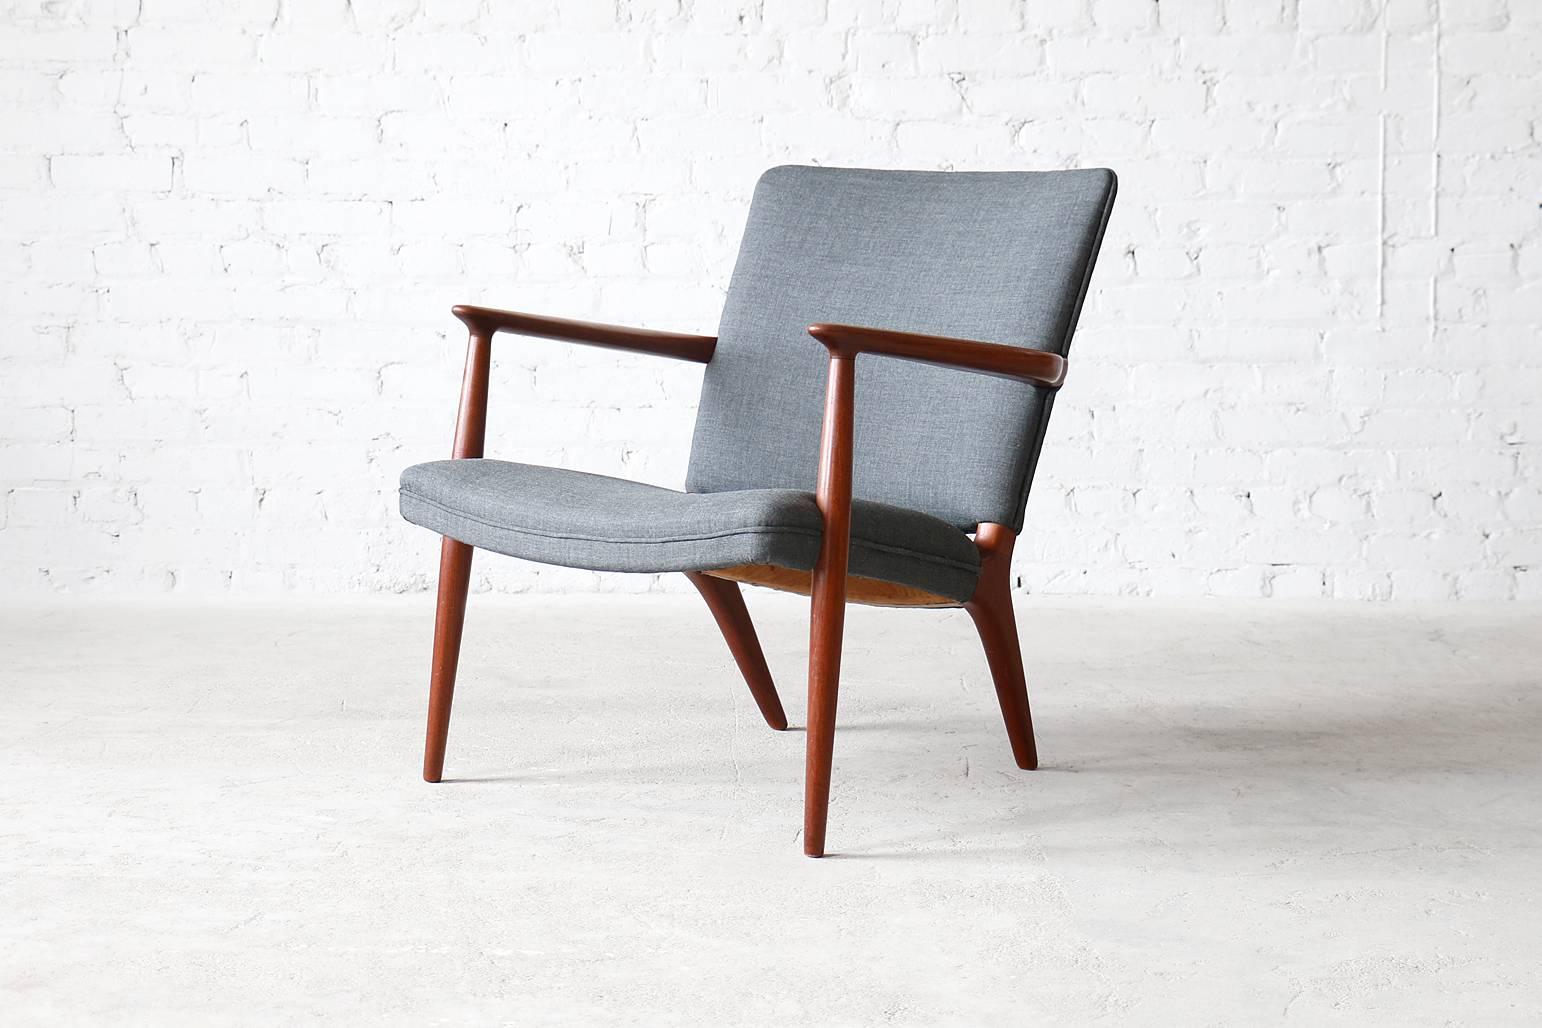 Rare model
Solid teak frame
New Kvadrat remix Danish wool

A very rare Jacob Kjær teak easy chair. This model was presented at the 1955 Copenhagen cabinetmaker's Guild Exhibition and was made in very few numbers. We've recovered it in Kvadrat